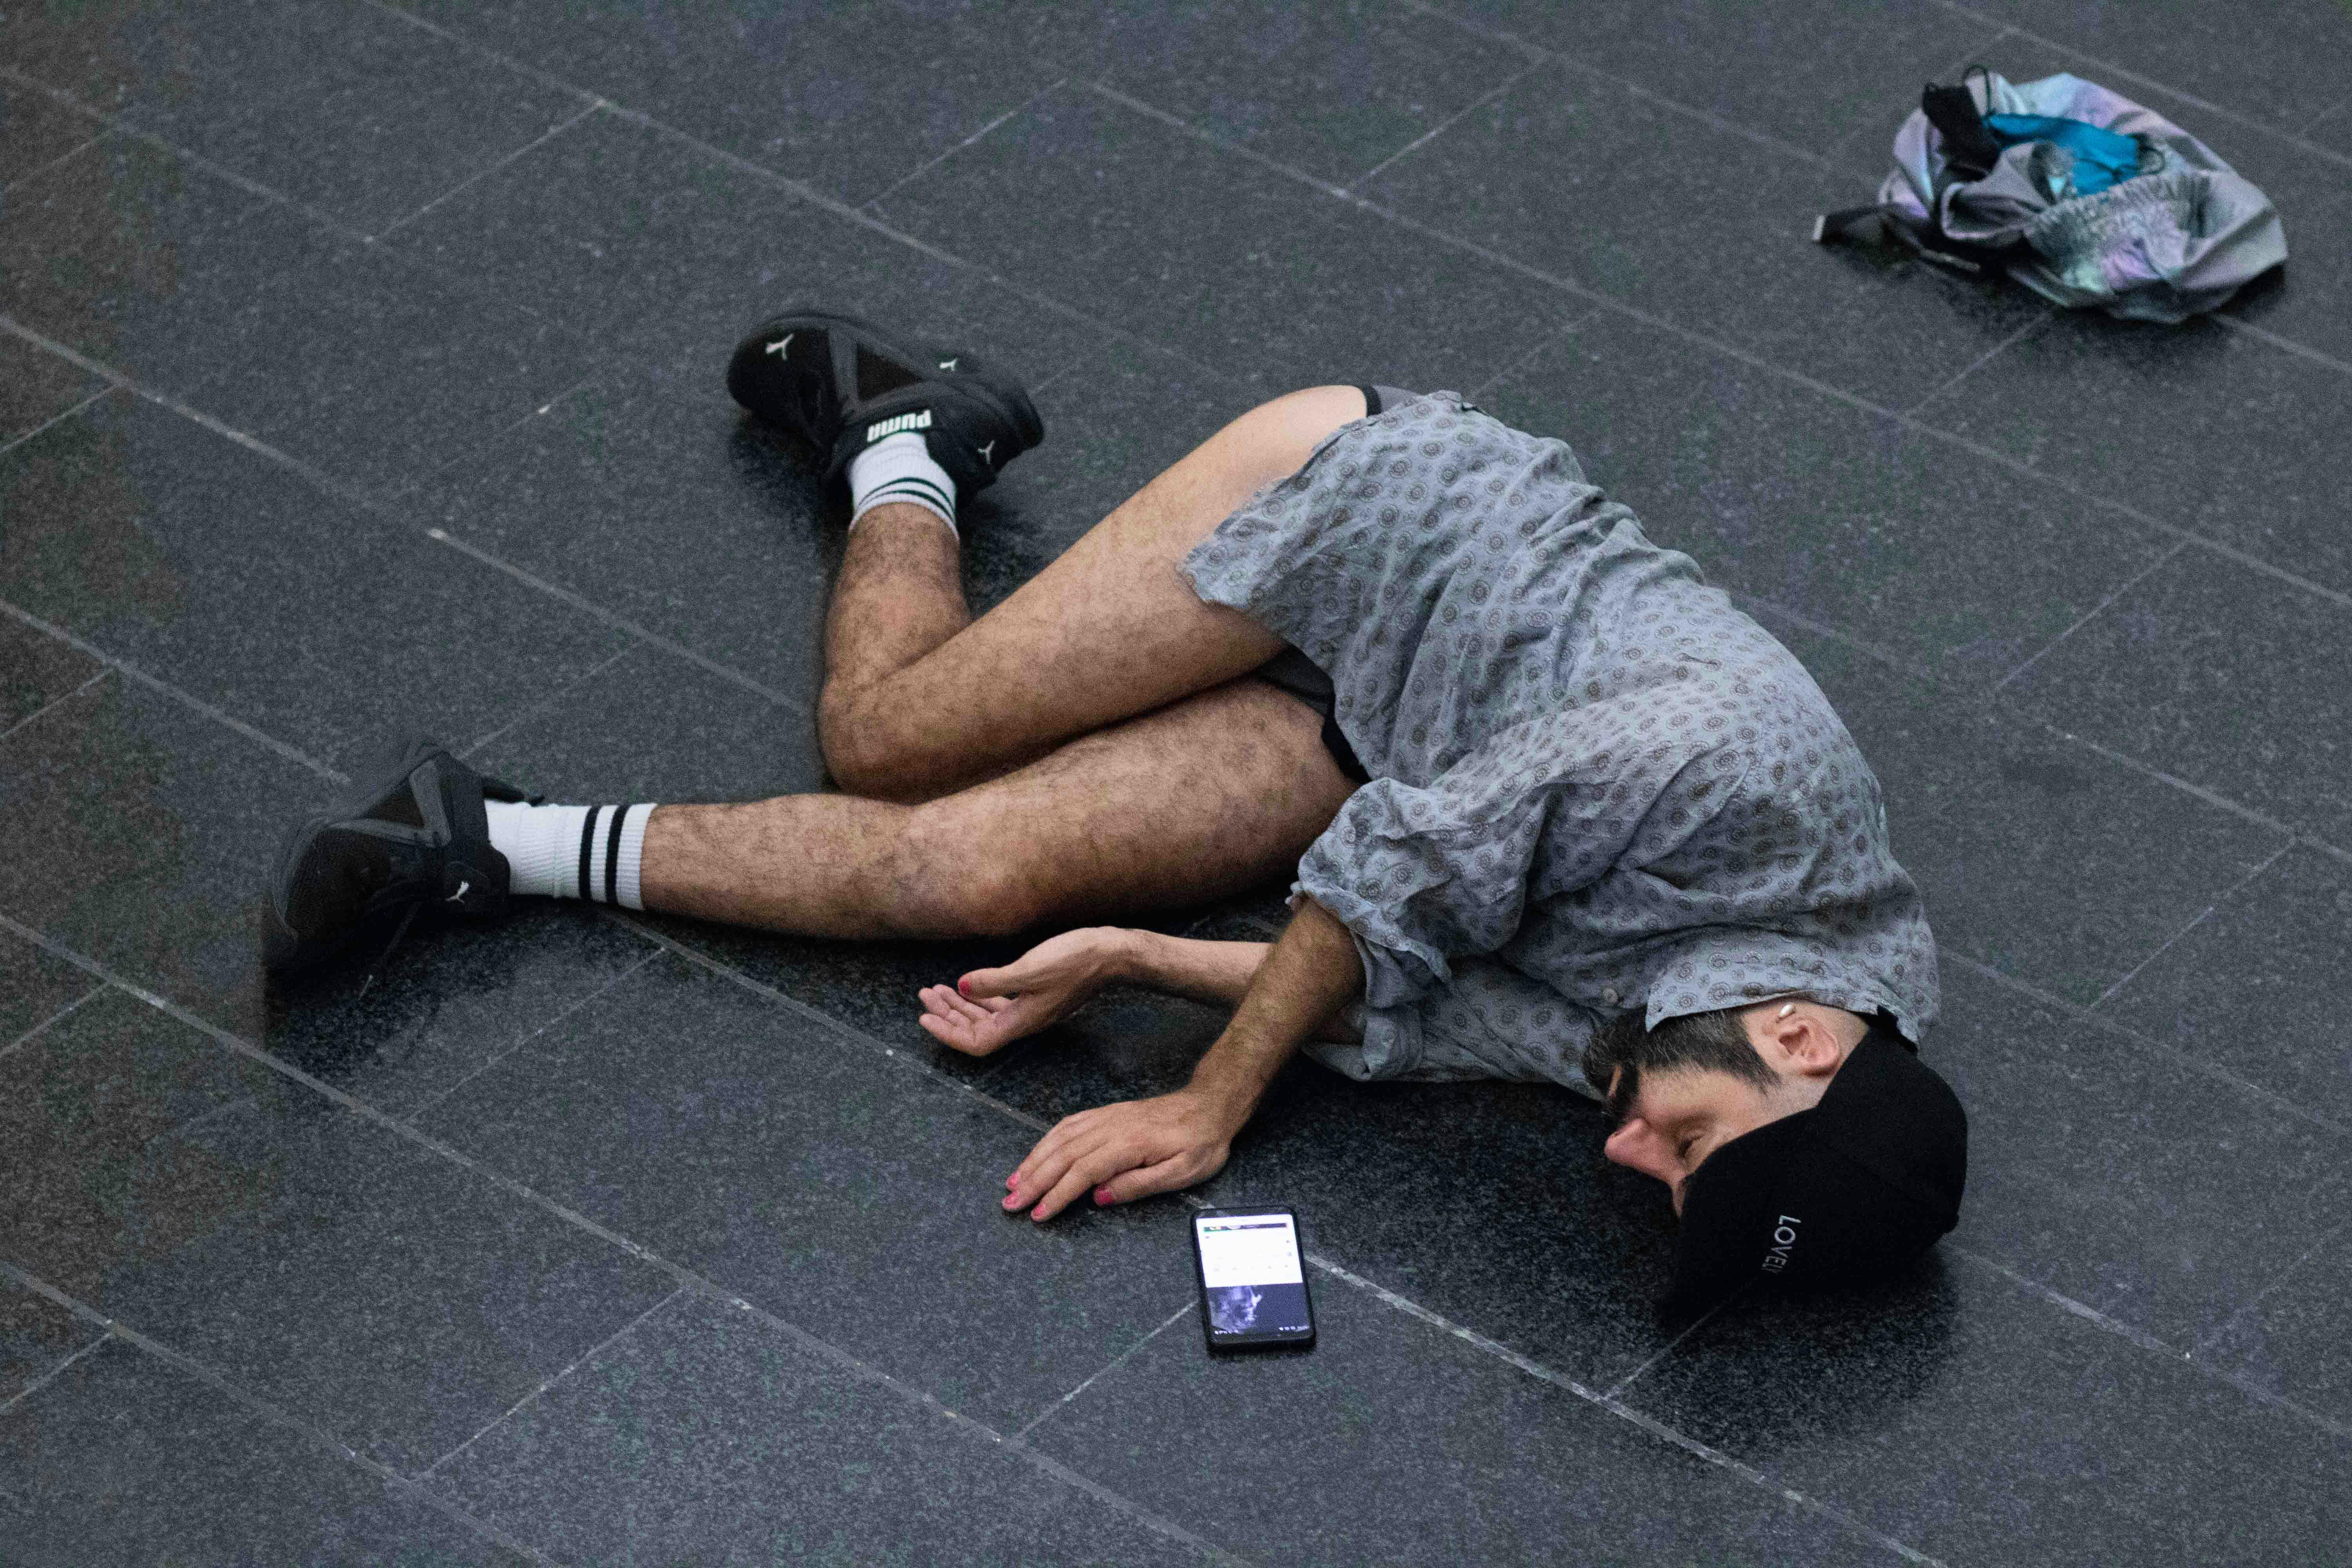 Daniele Ninarello is lying on the ground, on his side. He is wearing a shirt but not his pants, which are thrown on the floor next to him.